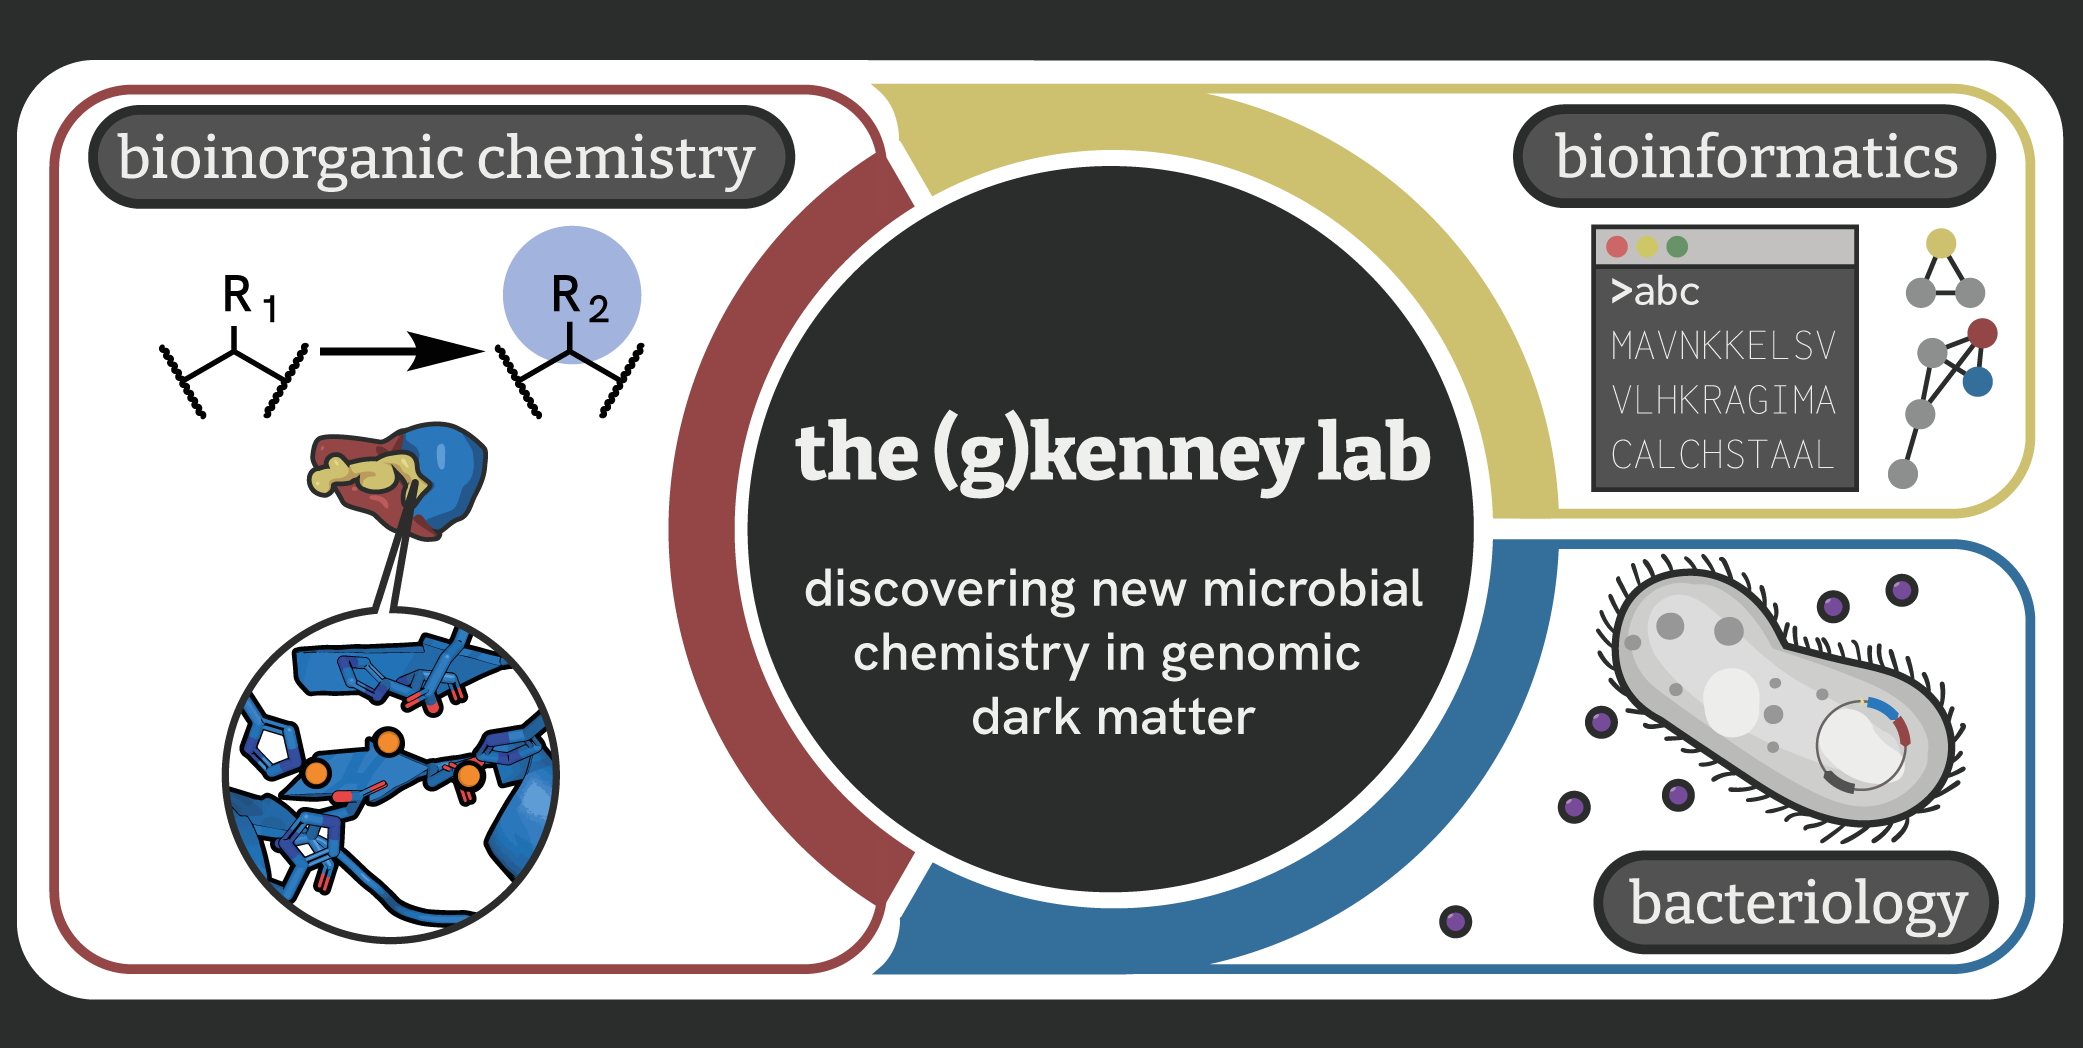 an image representing the core research interests of the (g)kenney lab: bio(inorganic) chemistry, bacteriology, and bioinformatics.